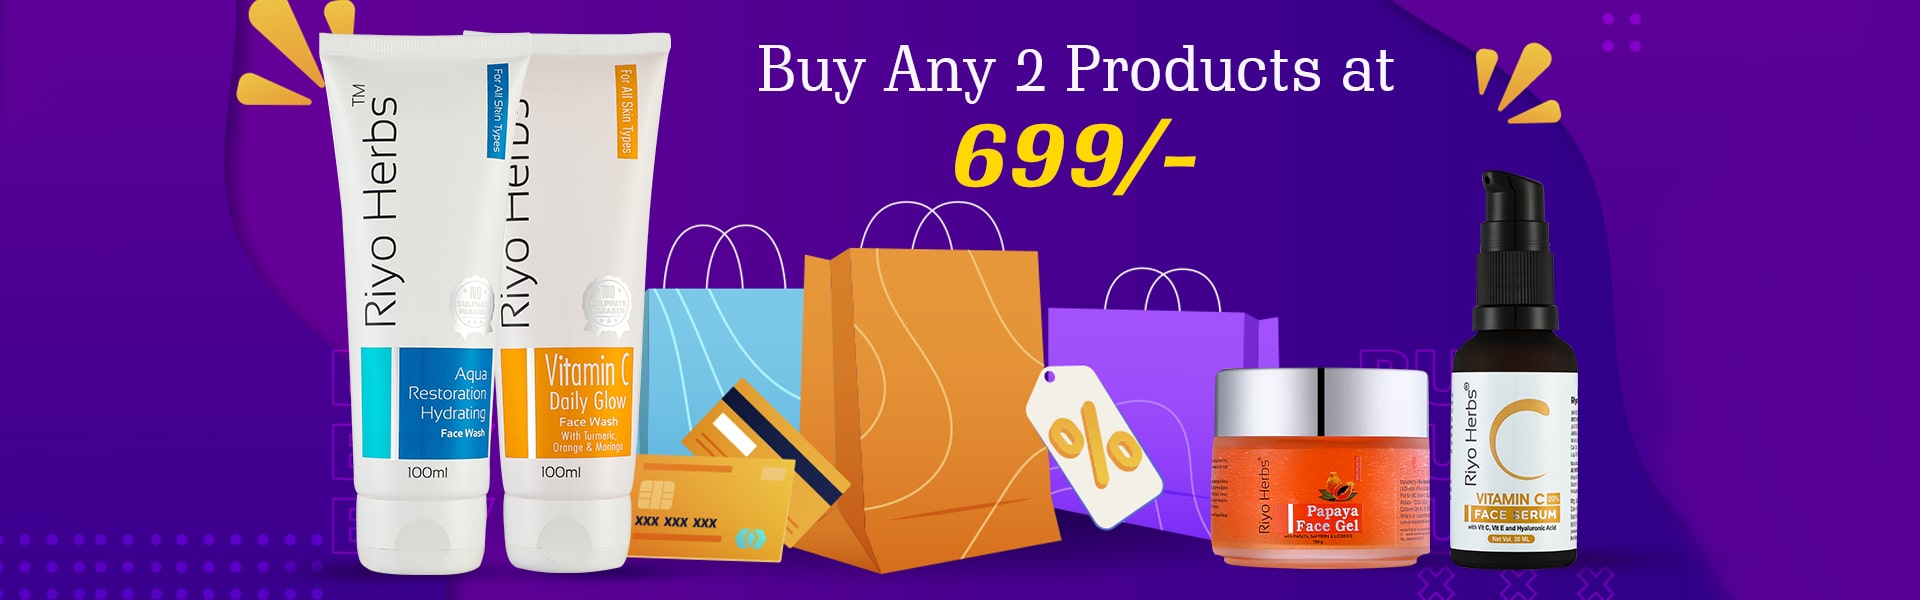 Buy any 2 Products at 699